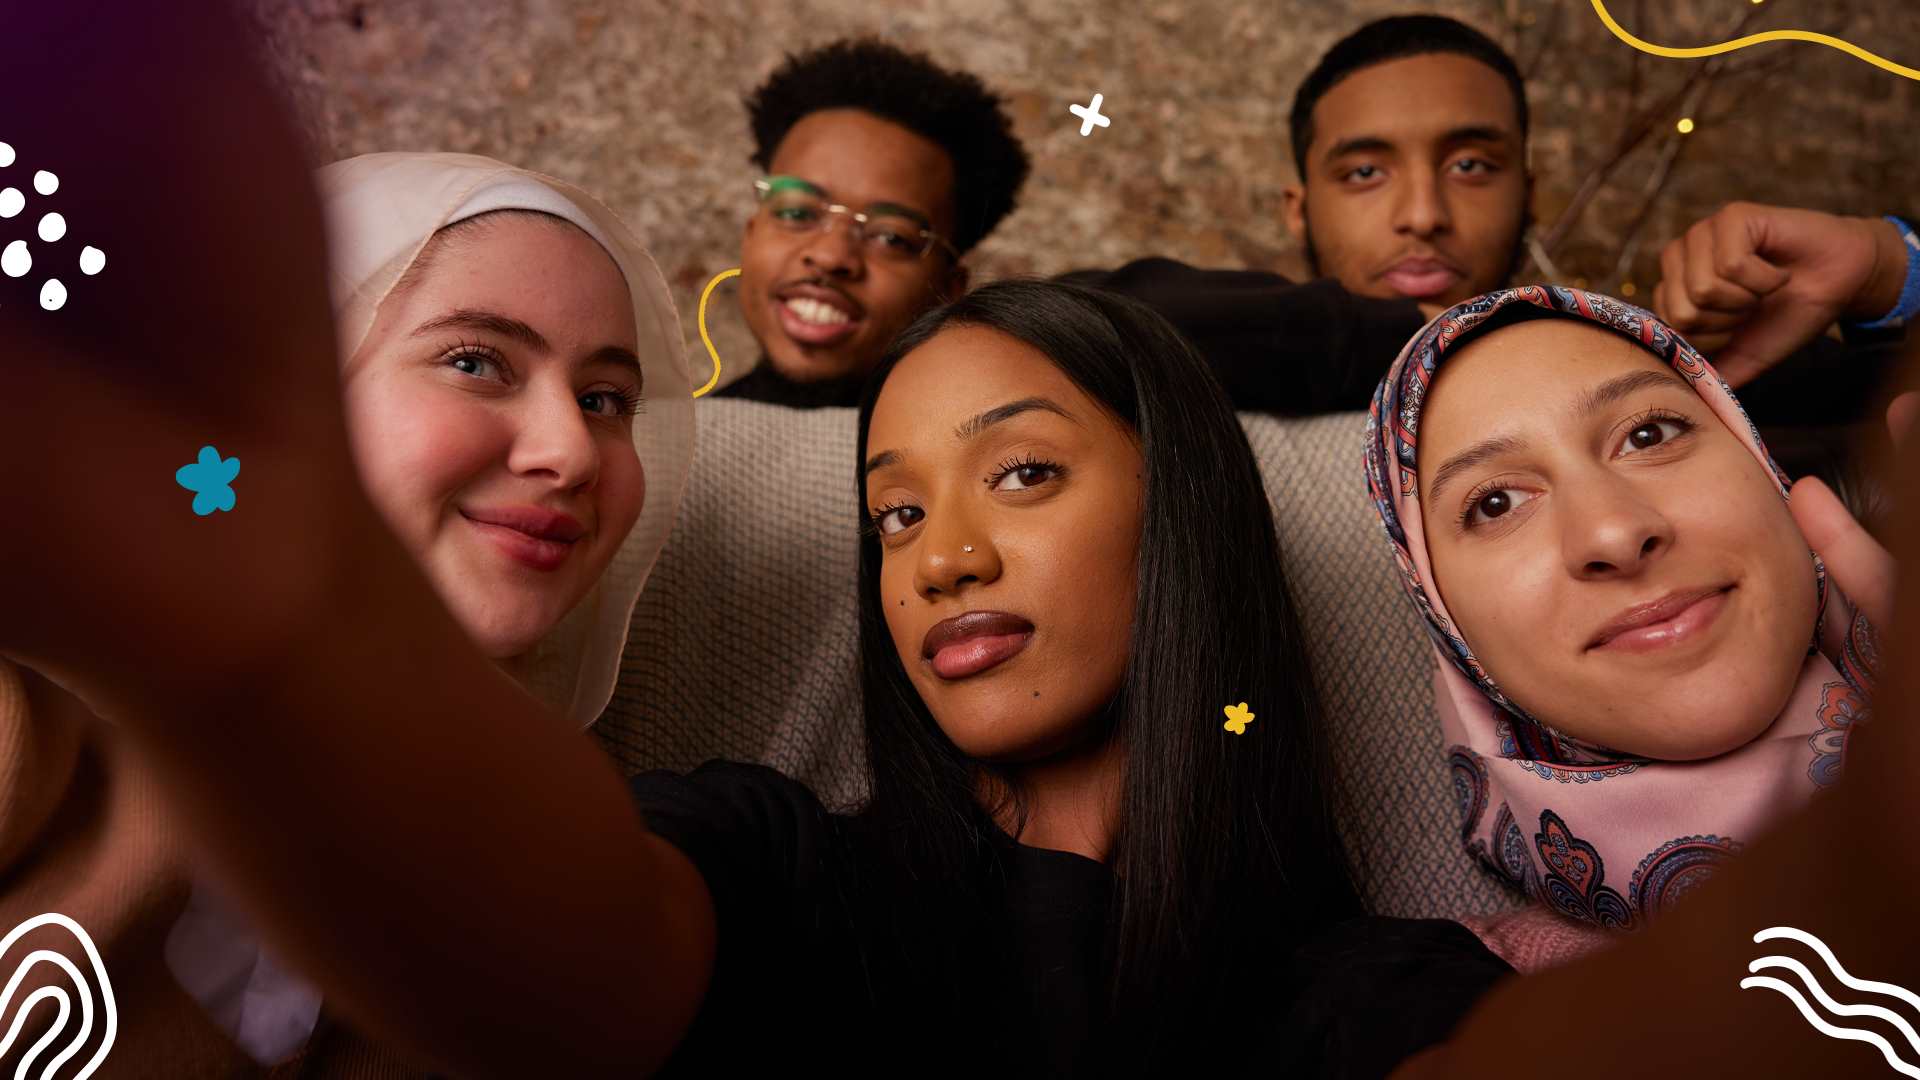 Muslim mental health campaign image of 5 young people taking selfie